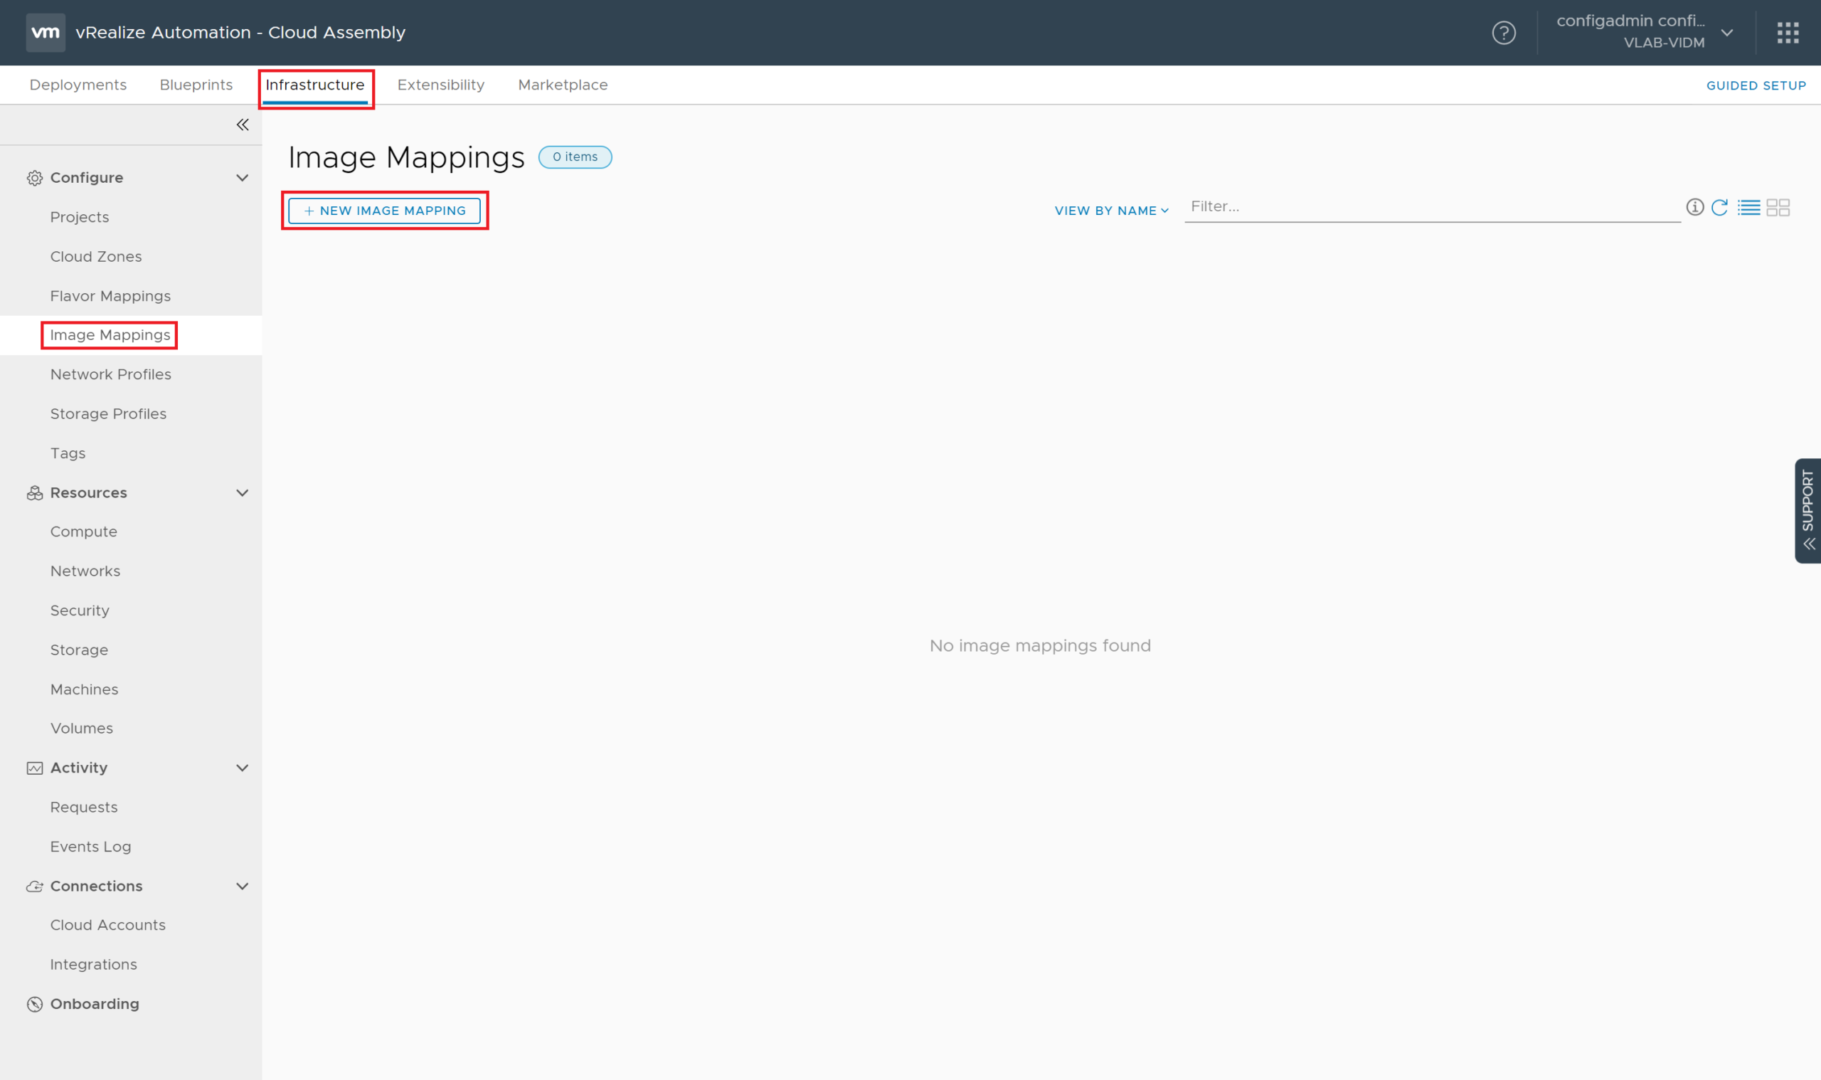 vRealize Automation 8.0 - Cloud Assembly - Image Mappings